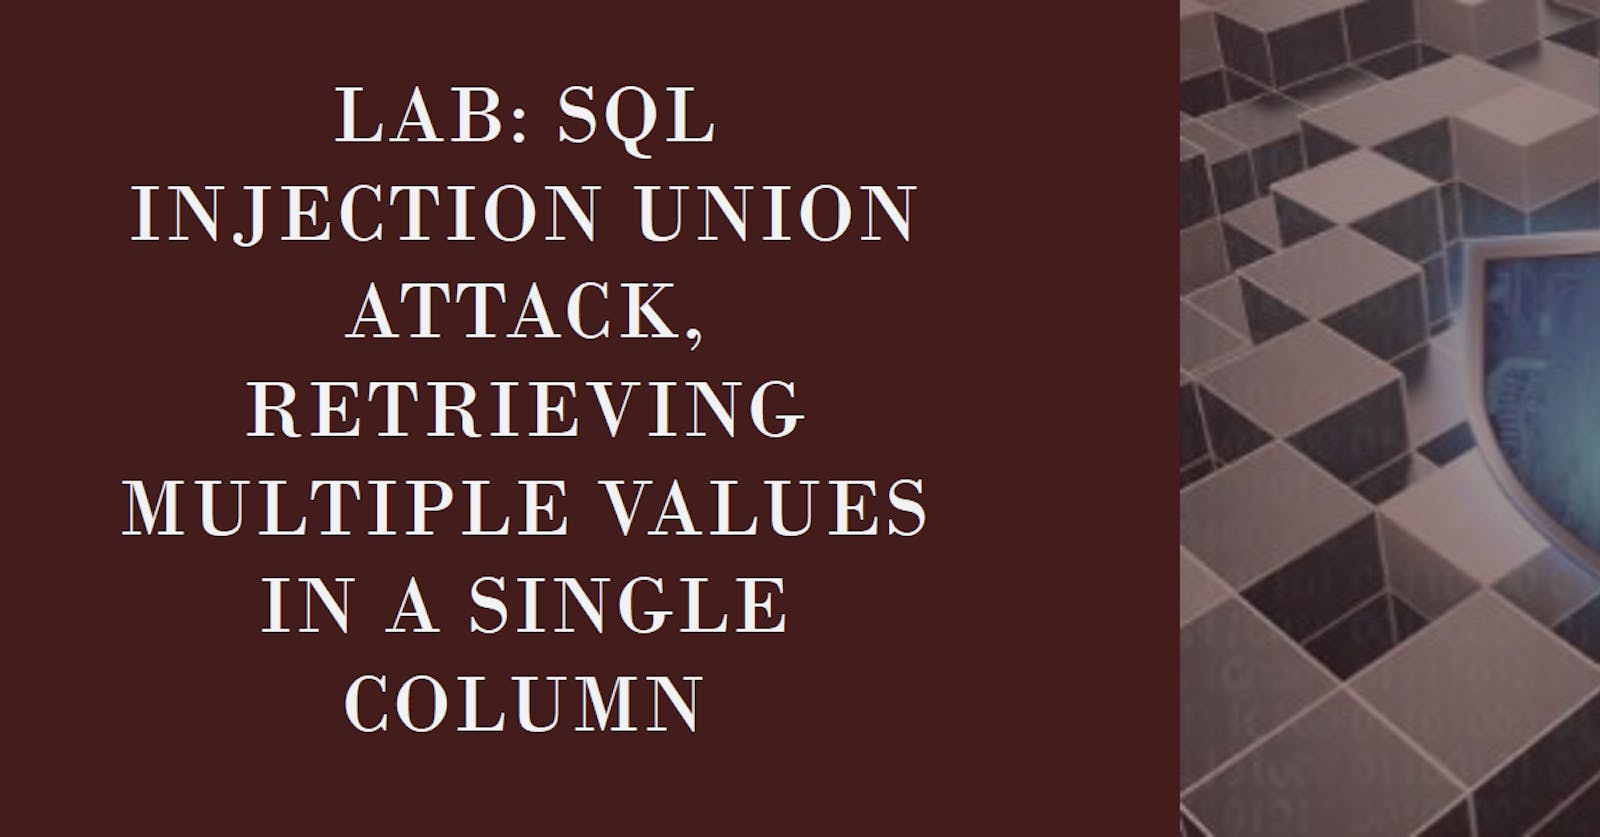 Lab: SQL injection UNION attack, retrieving multiple values in a single column